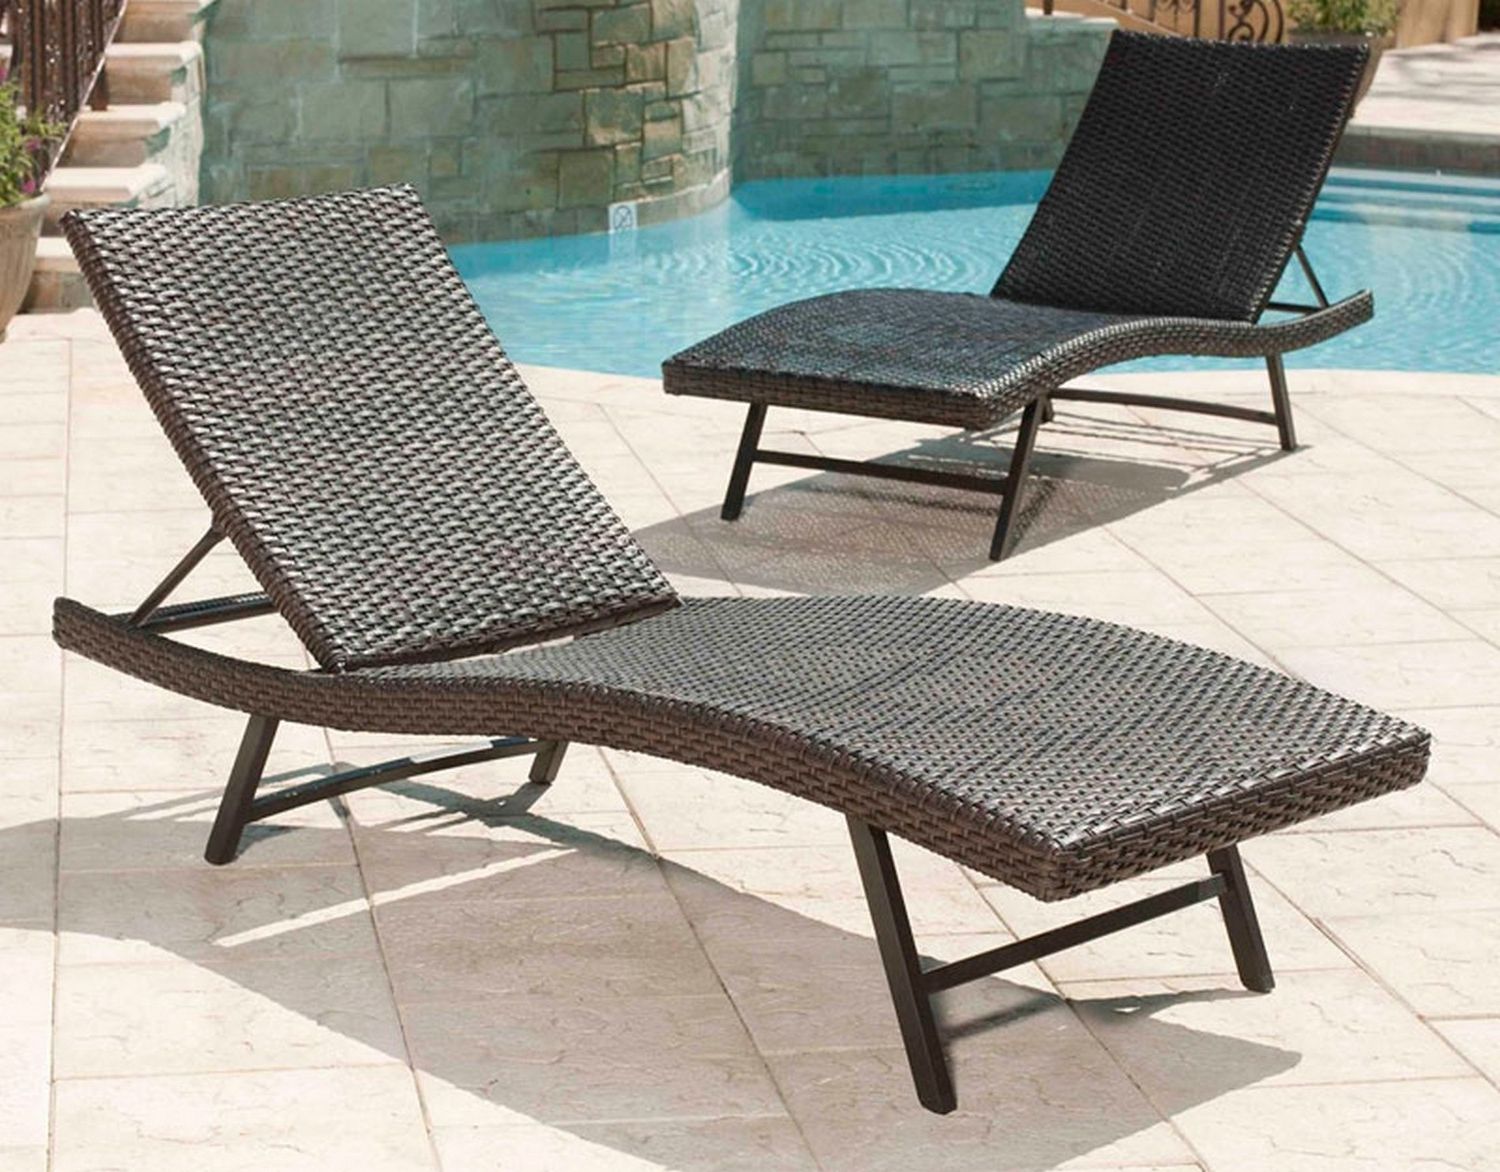 Lounge Chair : Poolside Chaise Lounge Chairs Sale Outdoor Lounger Regarding Most Current Pvc Outdoor Chaise Lounge Chairs (View 6 of 15)